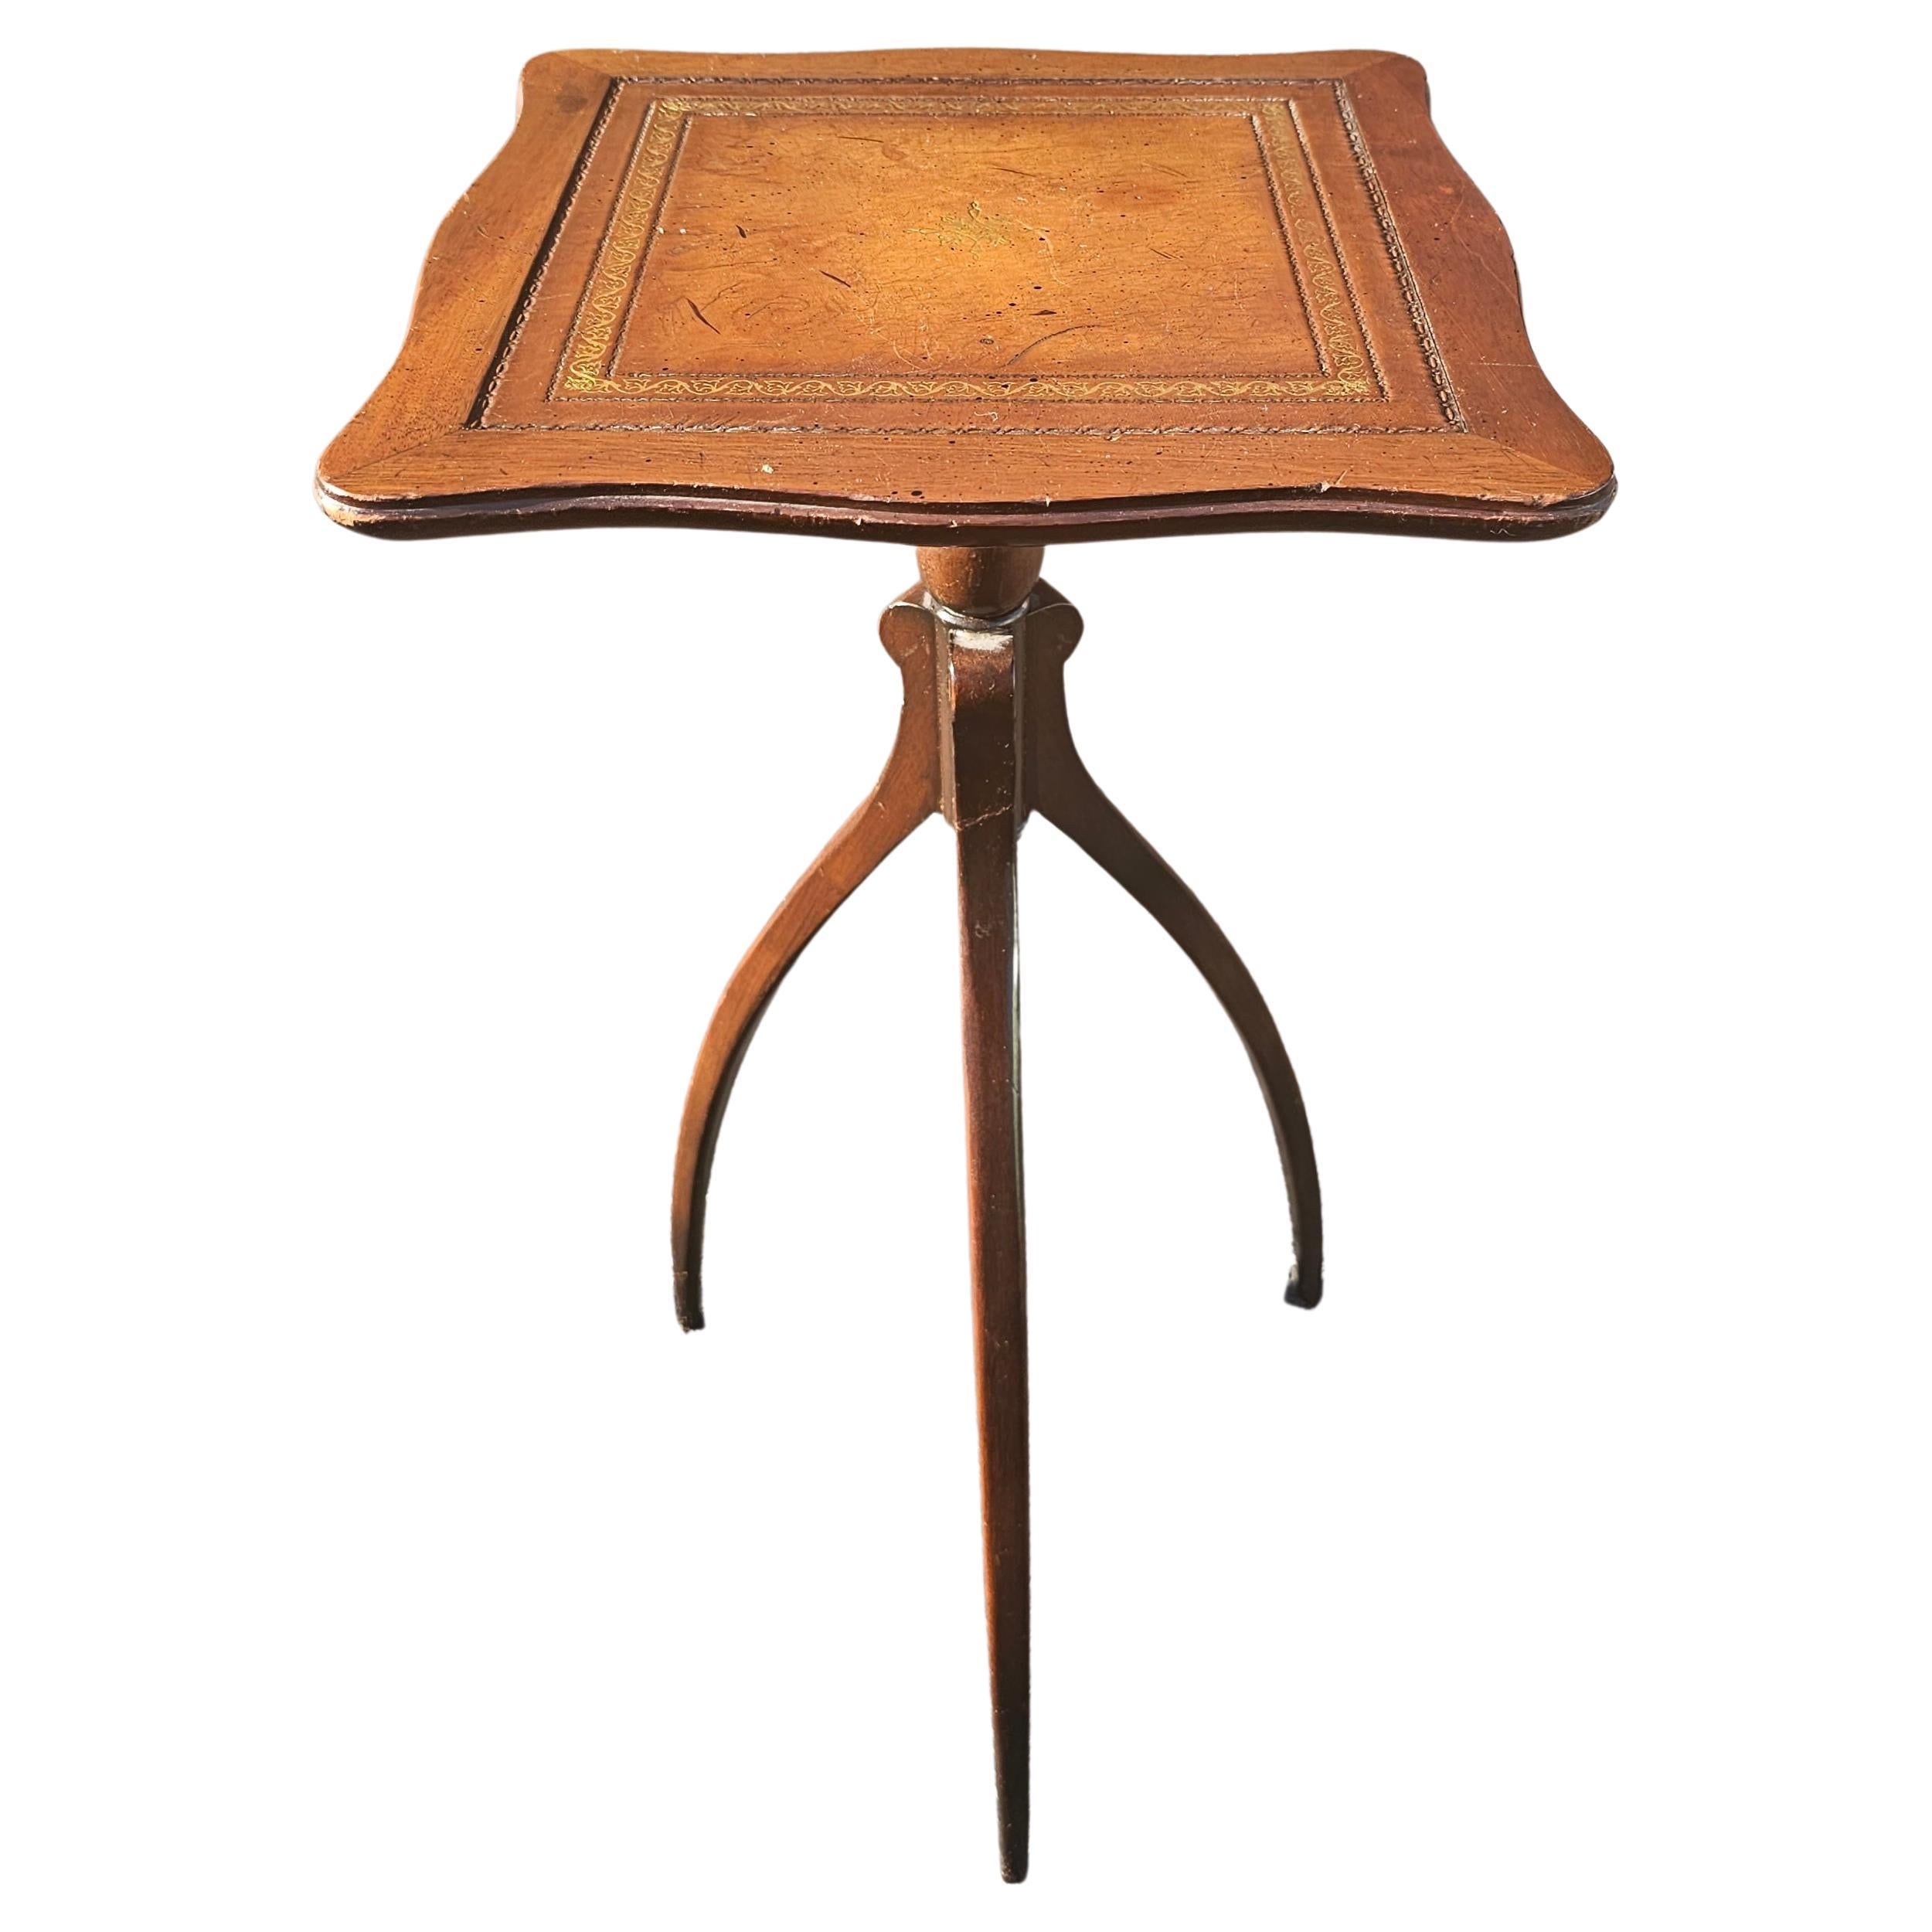 Mid 20th Century Spider Tripod Mahogany and Tooled Leather Top Candle Stand For Sale